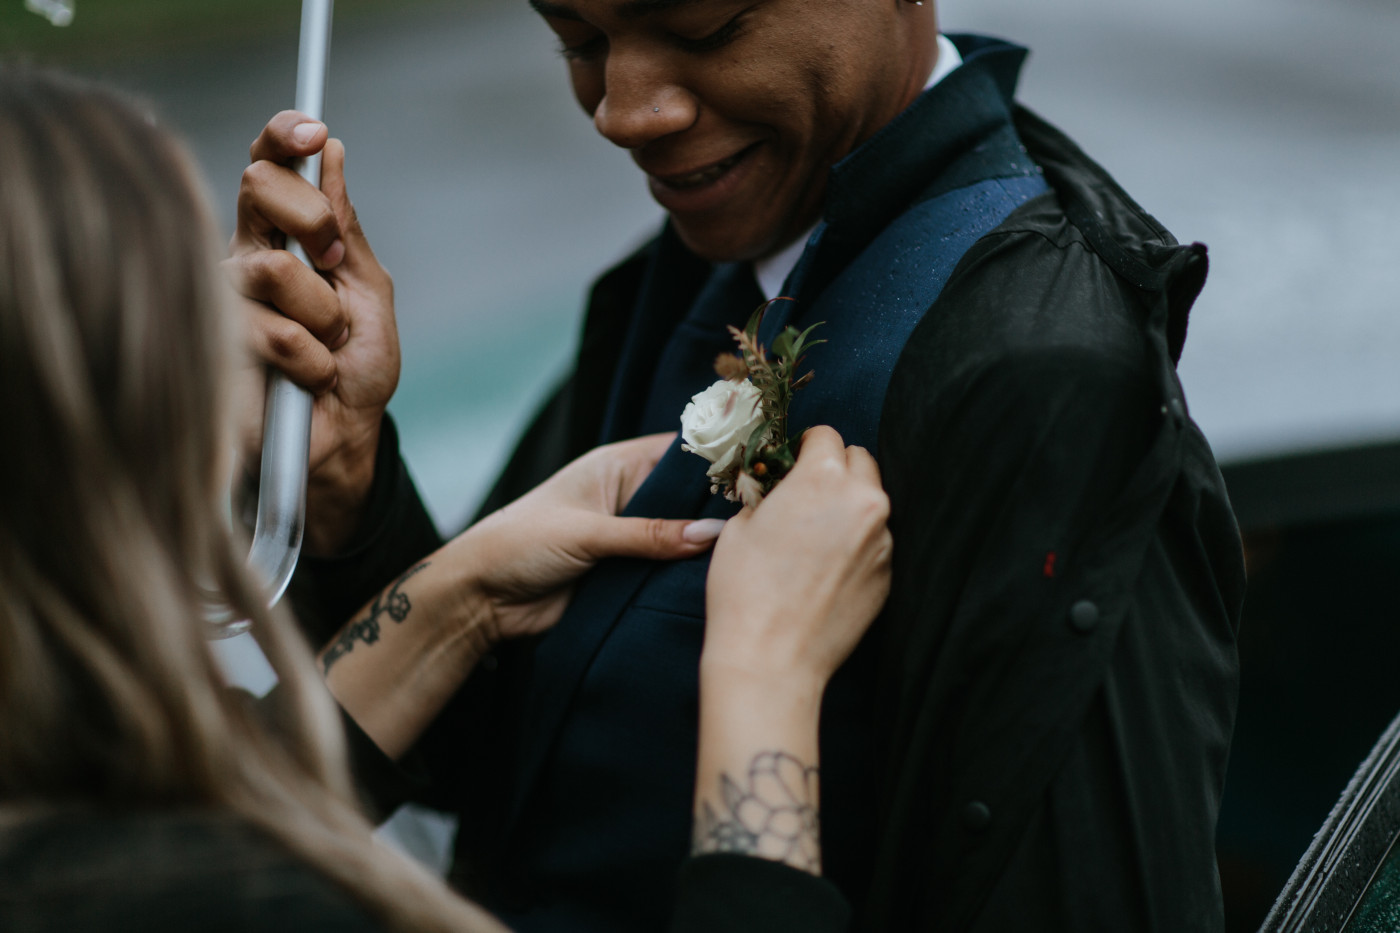 Ariana pins Deandre's boutonniere to him. Elopement photography at Mount Hood by Sienna Plus Josh.